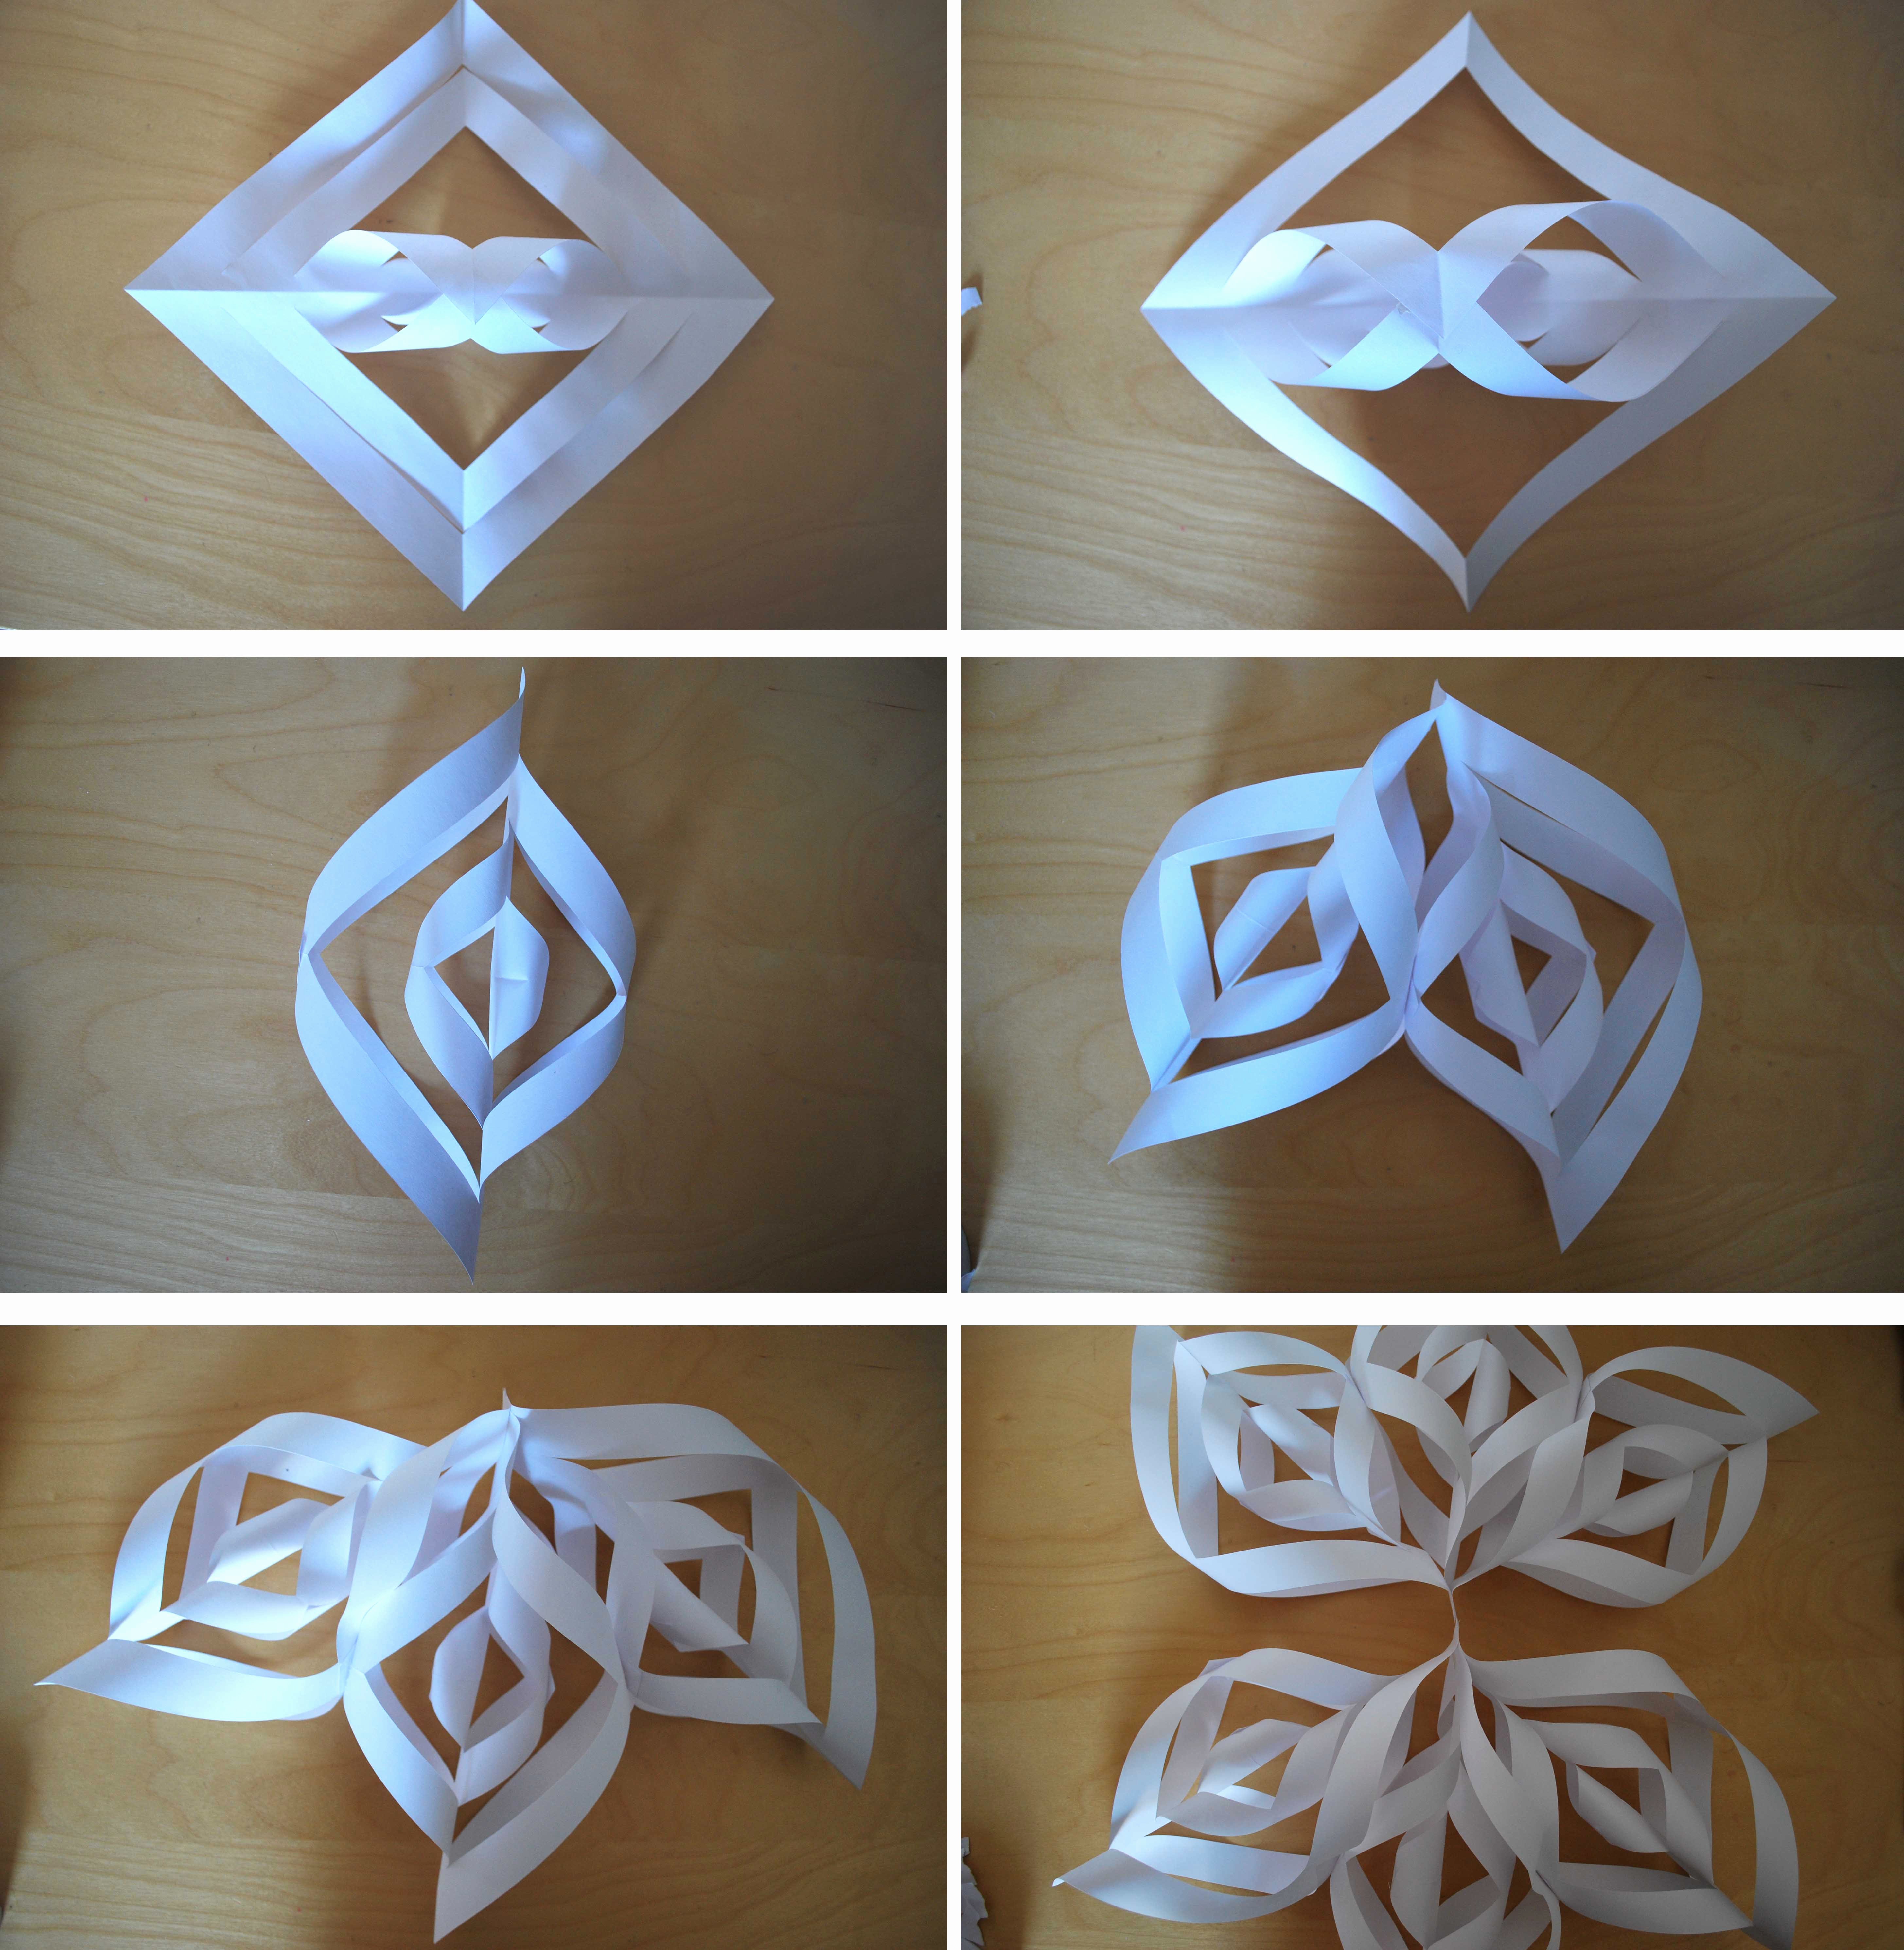 How to Make 3d Snowflakes Awesome 6 Ways with Snowflakes… 3d Snowflakes